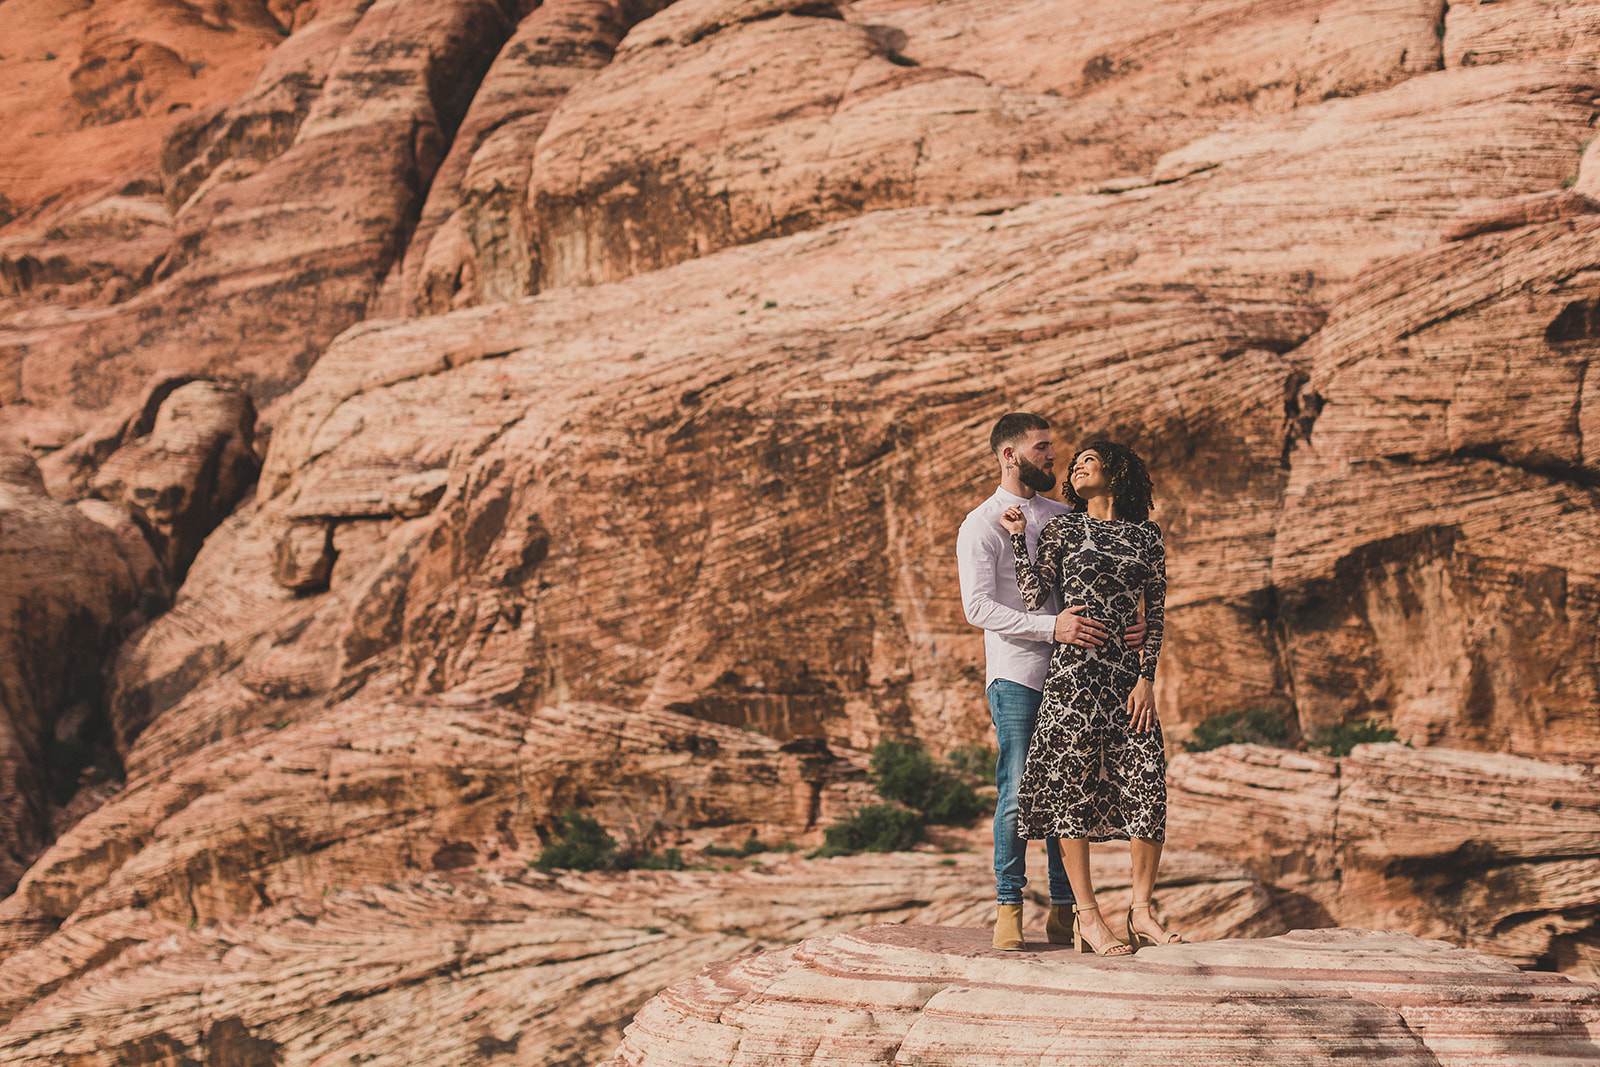 Taylor Made Photography captures bride and groom-to-be in Las Vegas